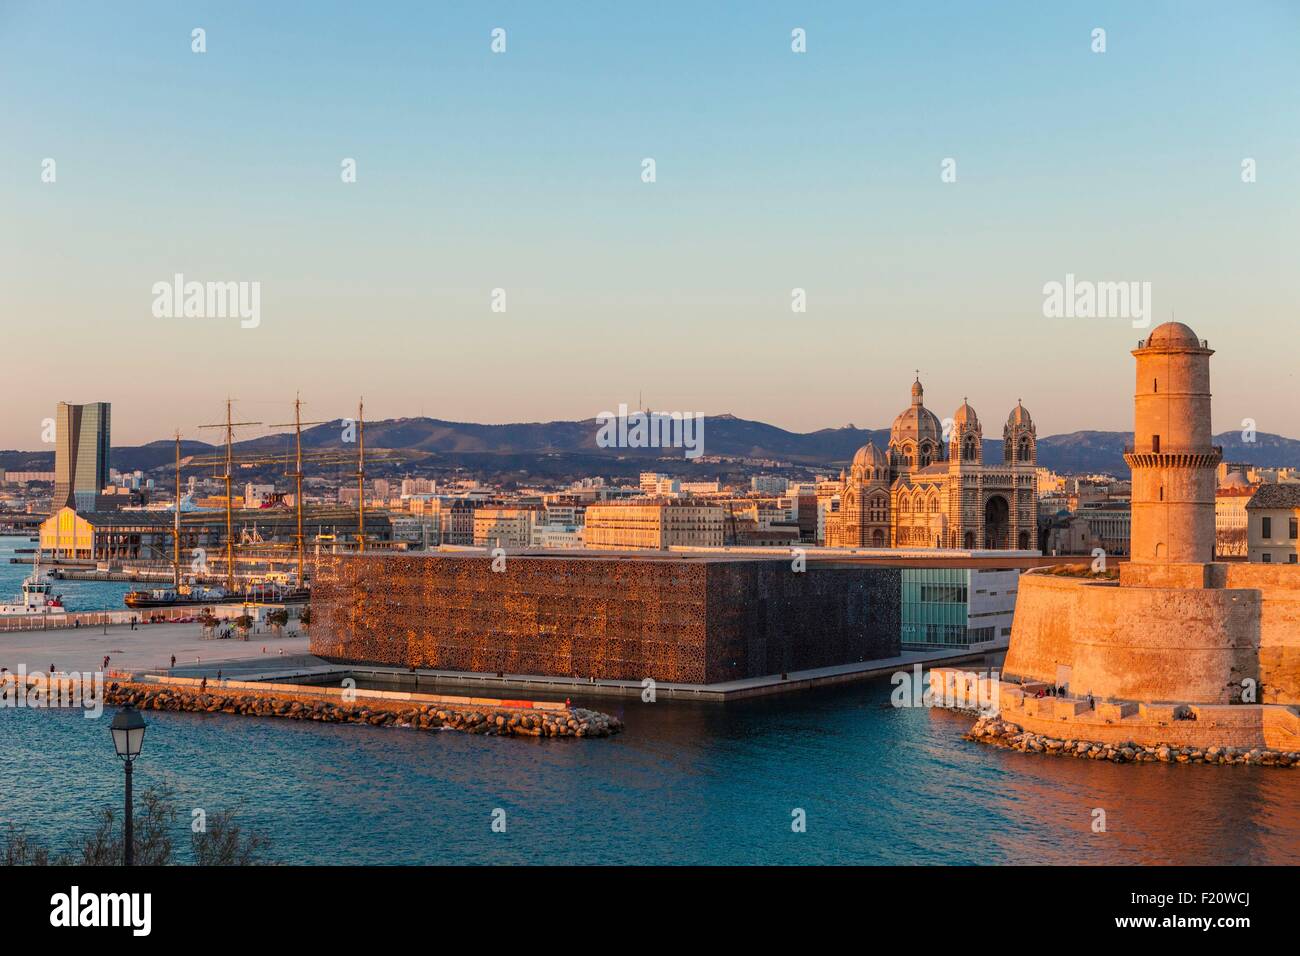 France, Bouches du Rhone, Marseille, the mole J4, MuCEM (Museum of European and Mediterranean Civilisations) by architect Rudy Ricciotti and the Fort Saint Jean, the Cathedral of the Major, CMA CGM tower by architect Zaha Hadid Stock Photo